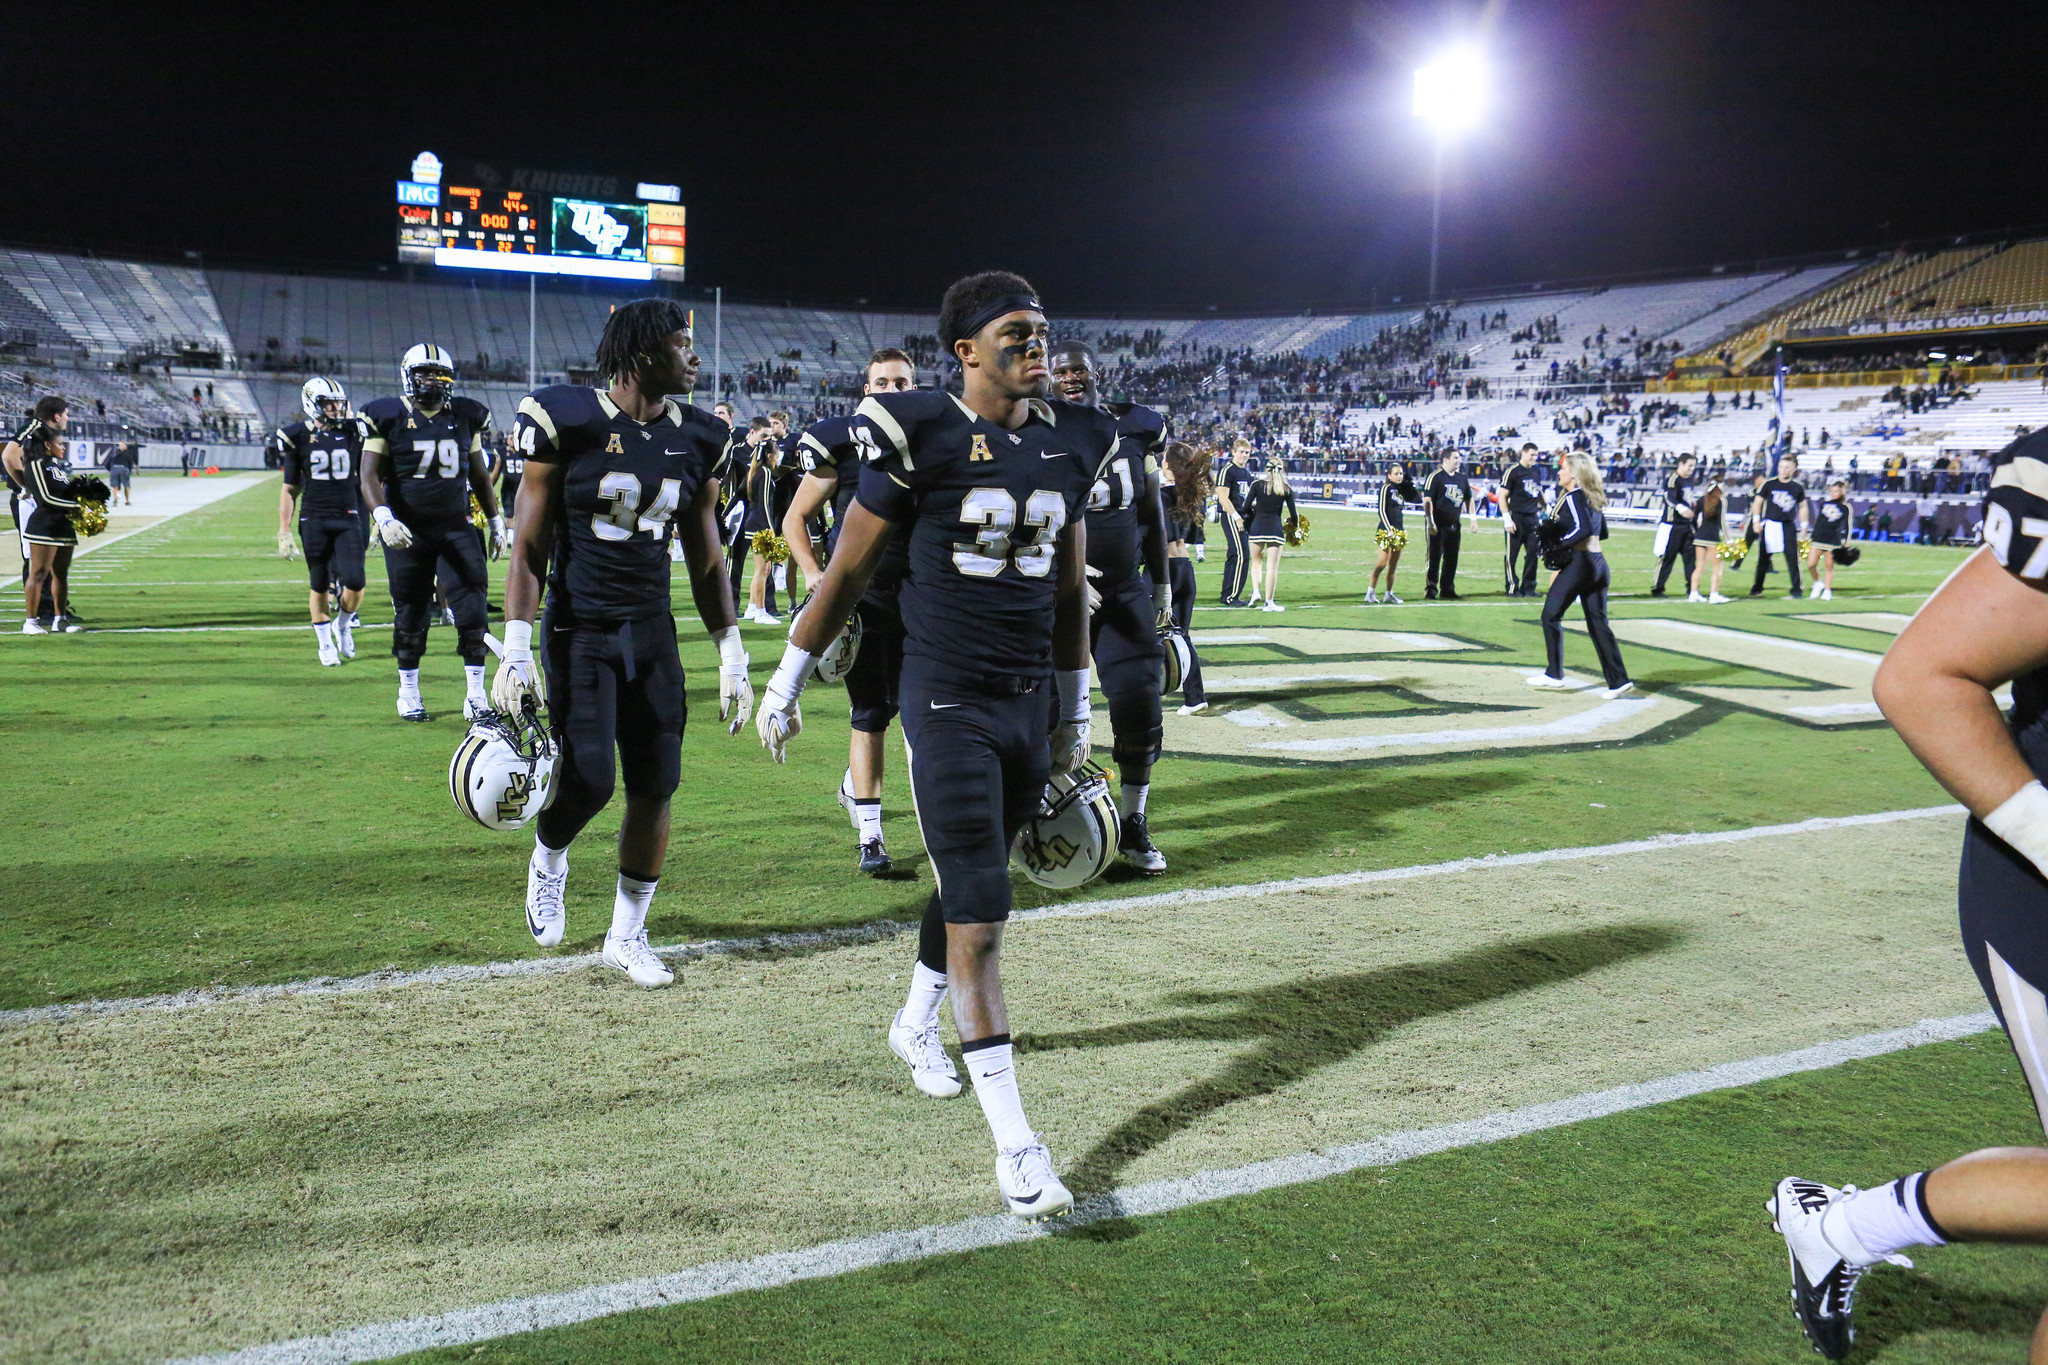 [Image: os-pictures-ucf-vs-usf-football-20151126-026]